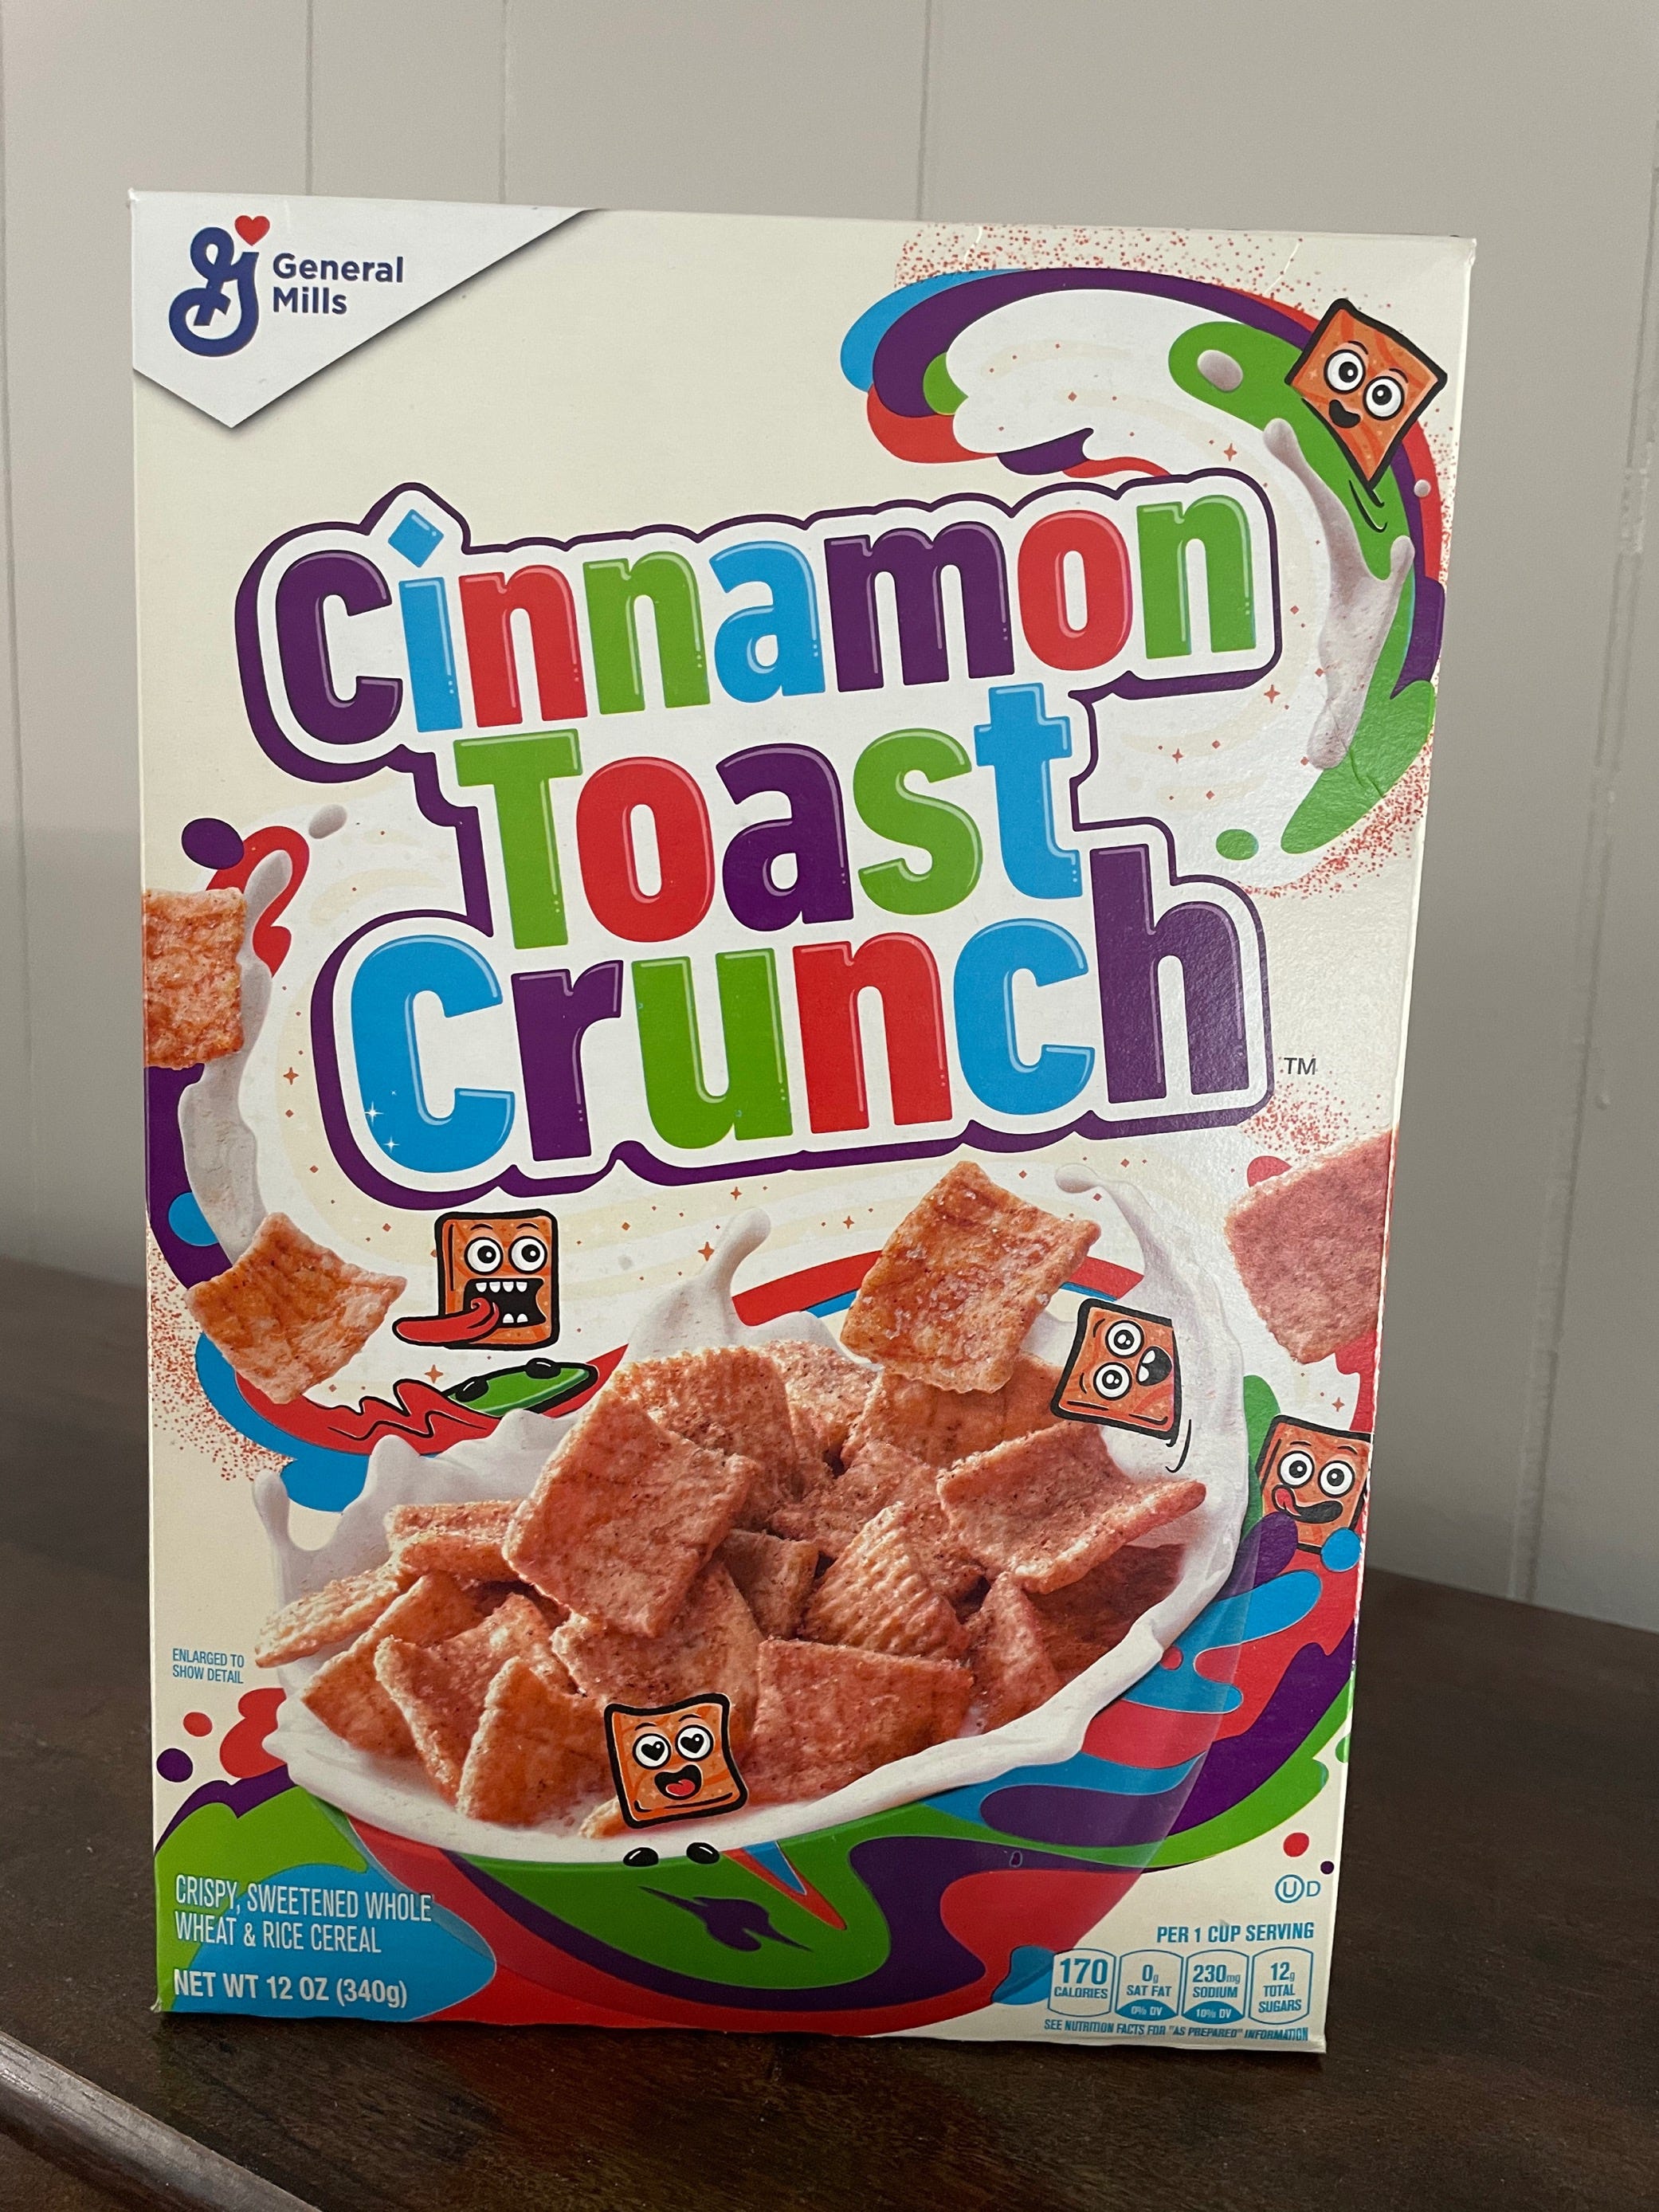 Cinnamon Toast Crunch shrimp? Comedian believes his box of General Mills cereal contained shrimp tails